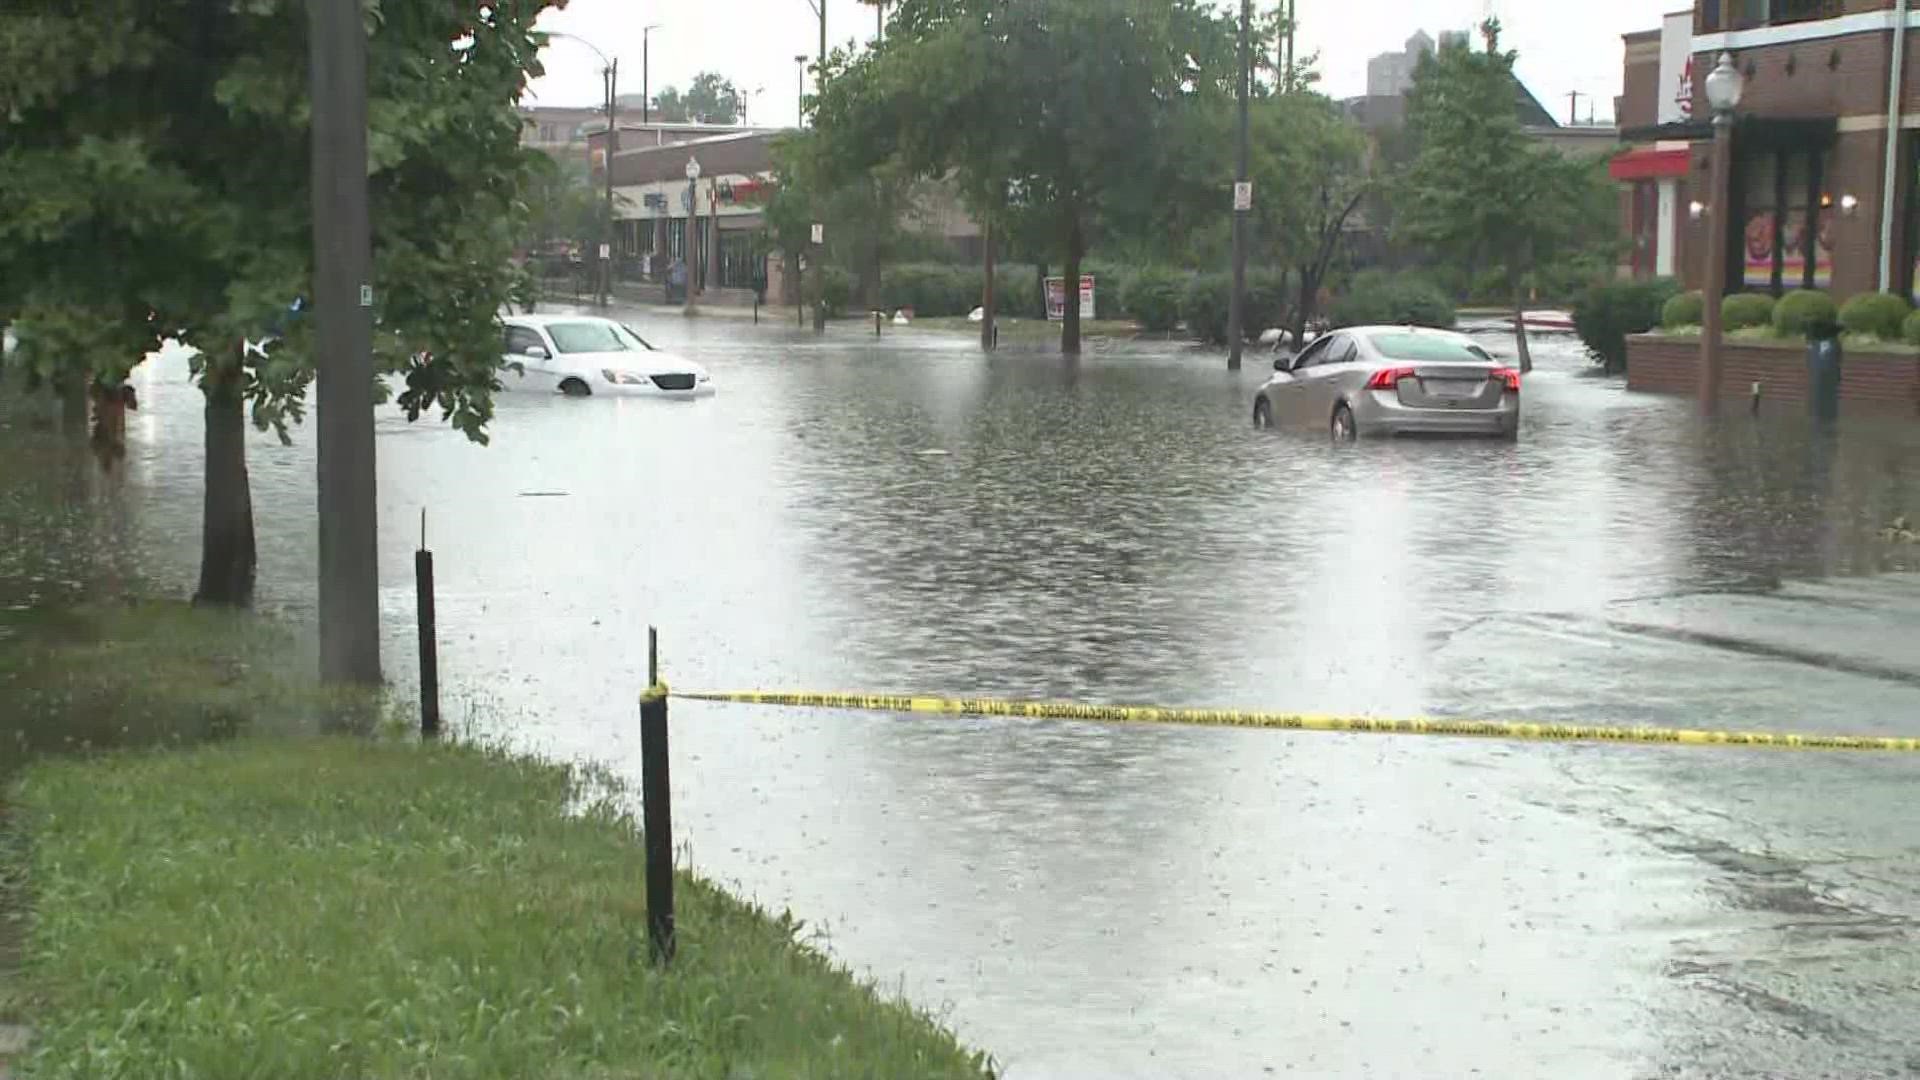 Cars were stuck in floodwaters near Olive and Vandevanter.